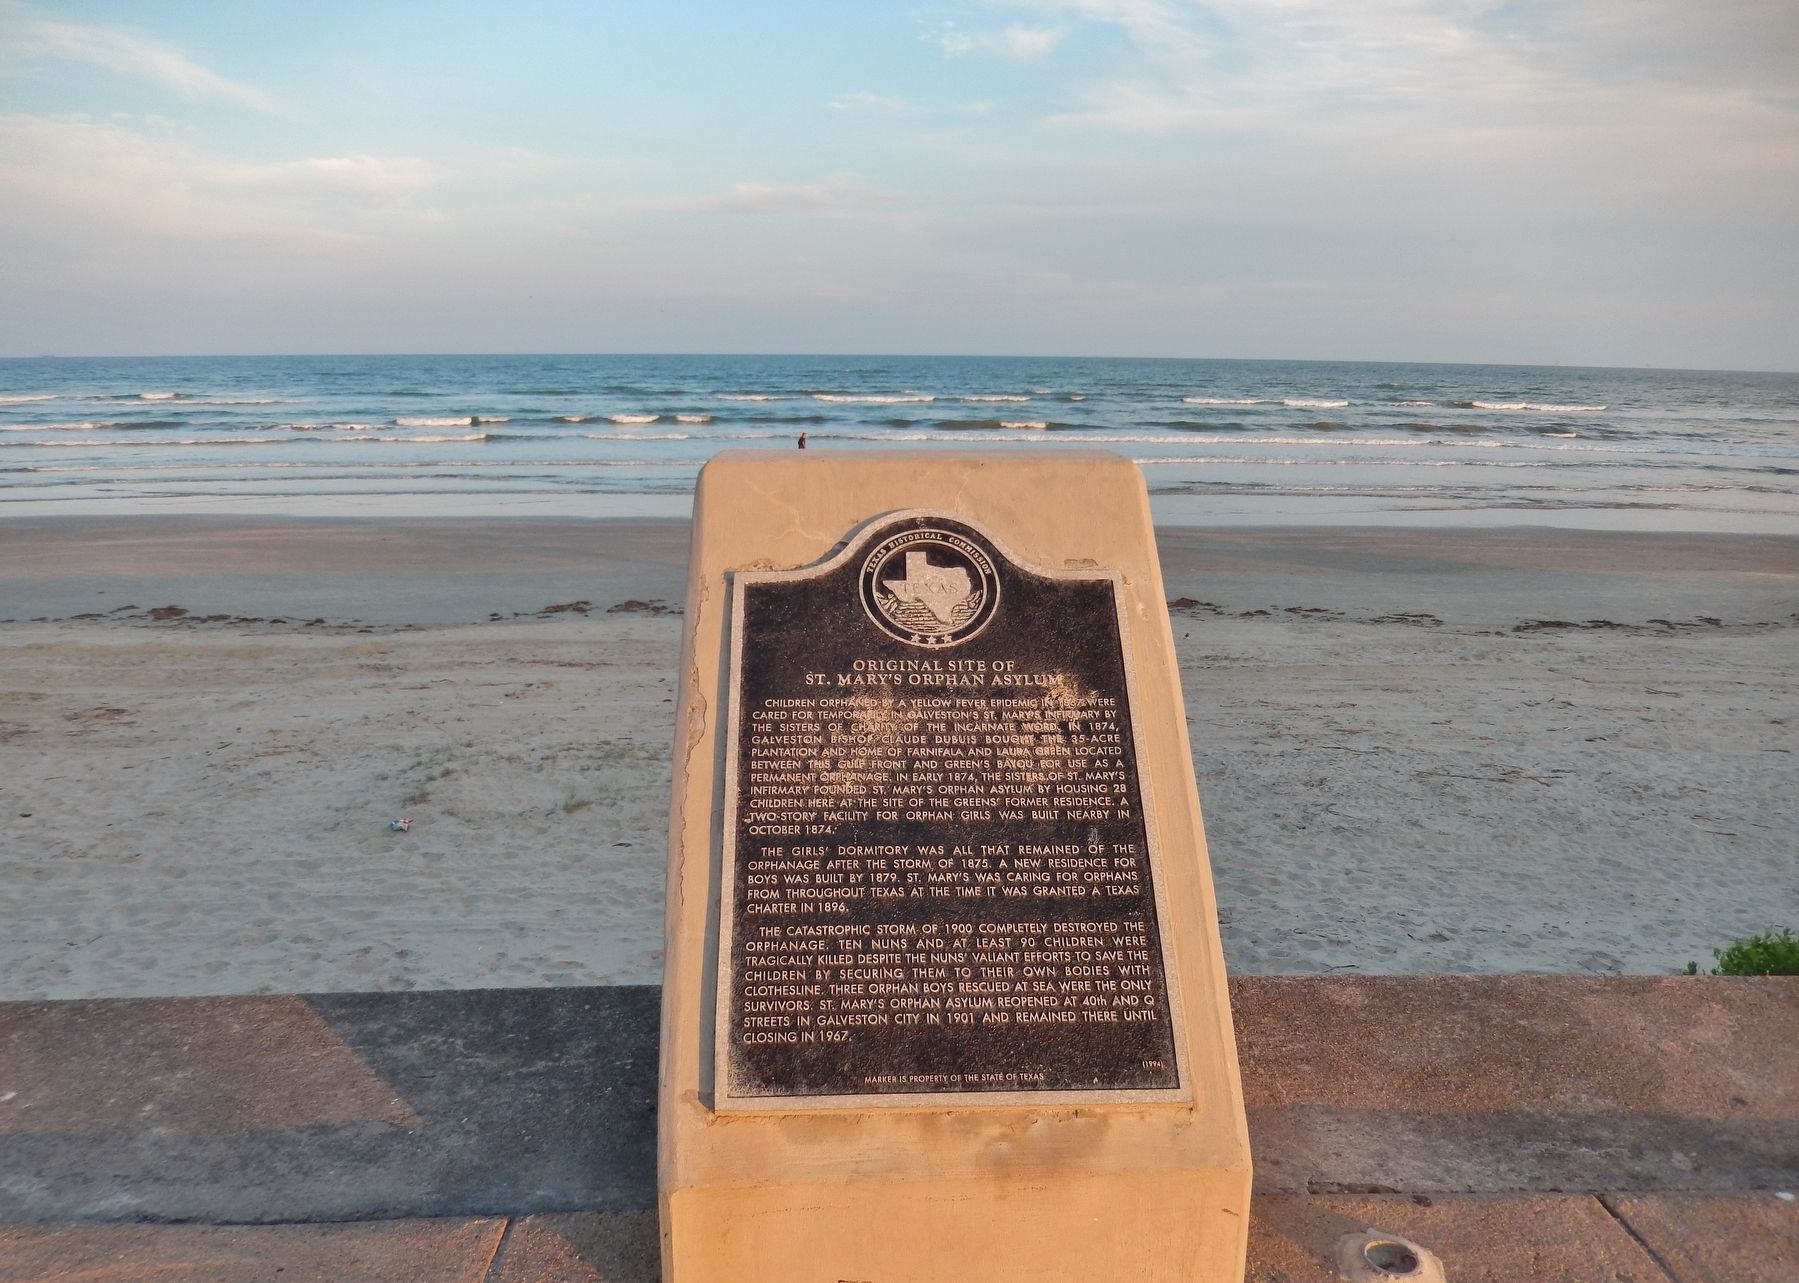 Original Site of St. Mary's Orphan Asylum Marker (<i>wide view; Galveston Beach in background</i>) image. Click for full size.